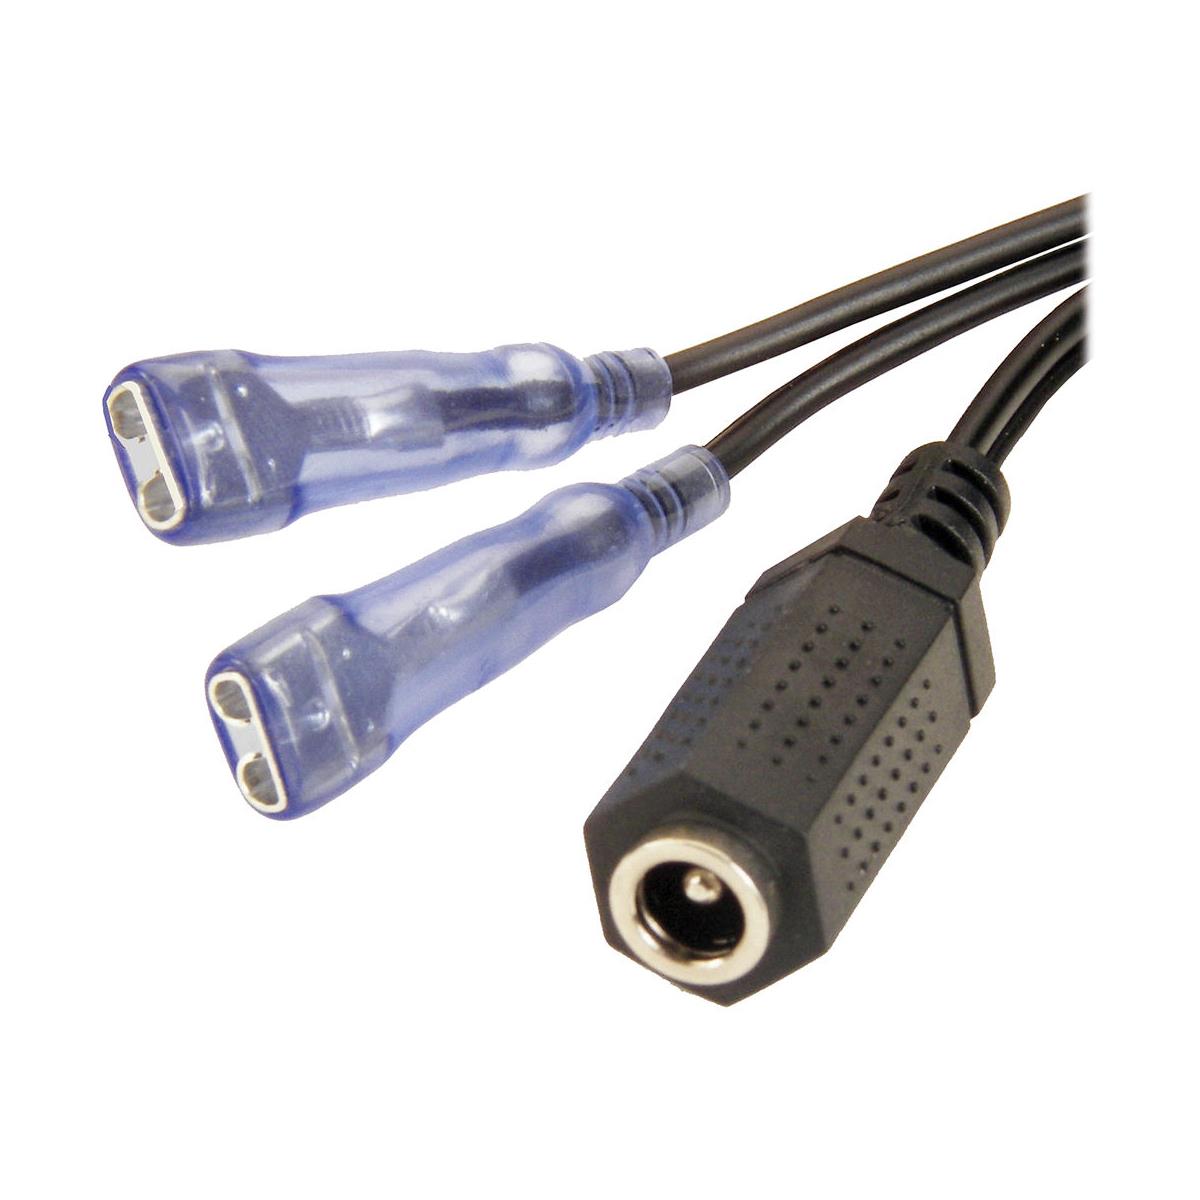 Image of Littlite Spade Lug Adapter Cable